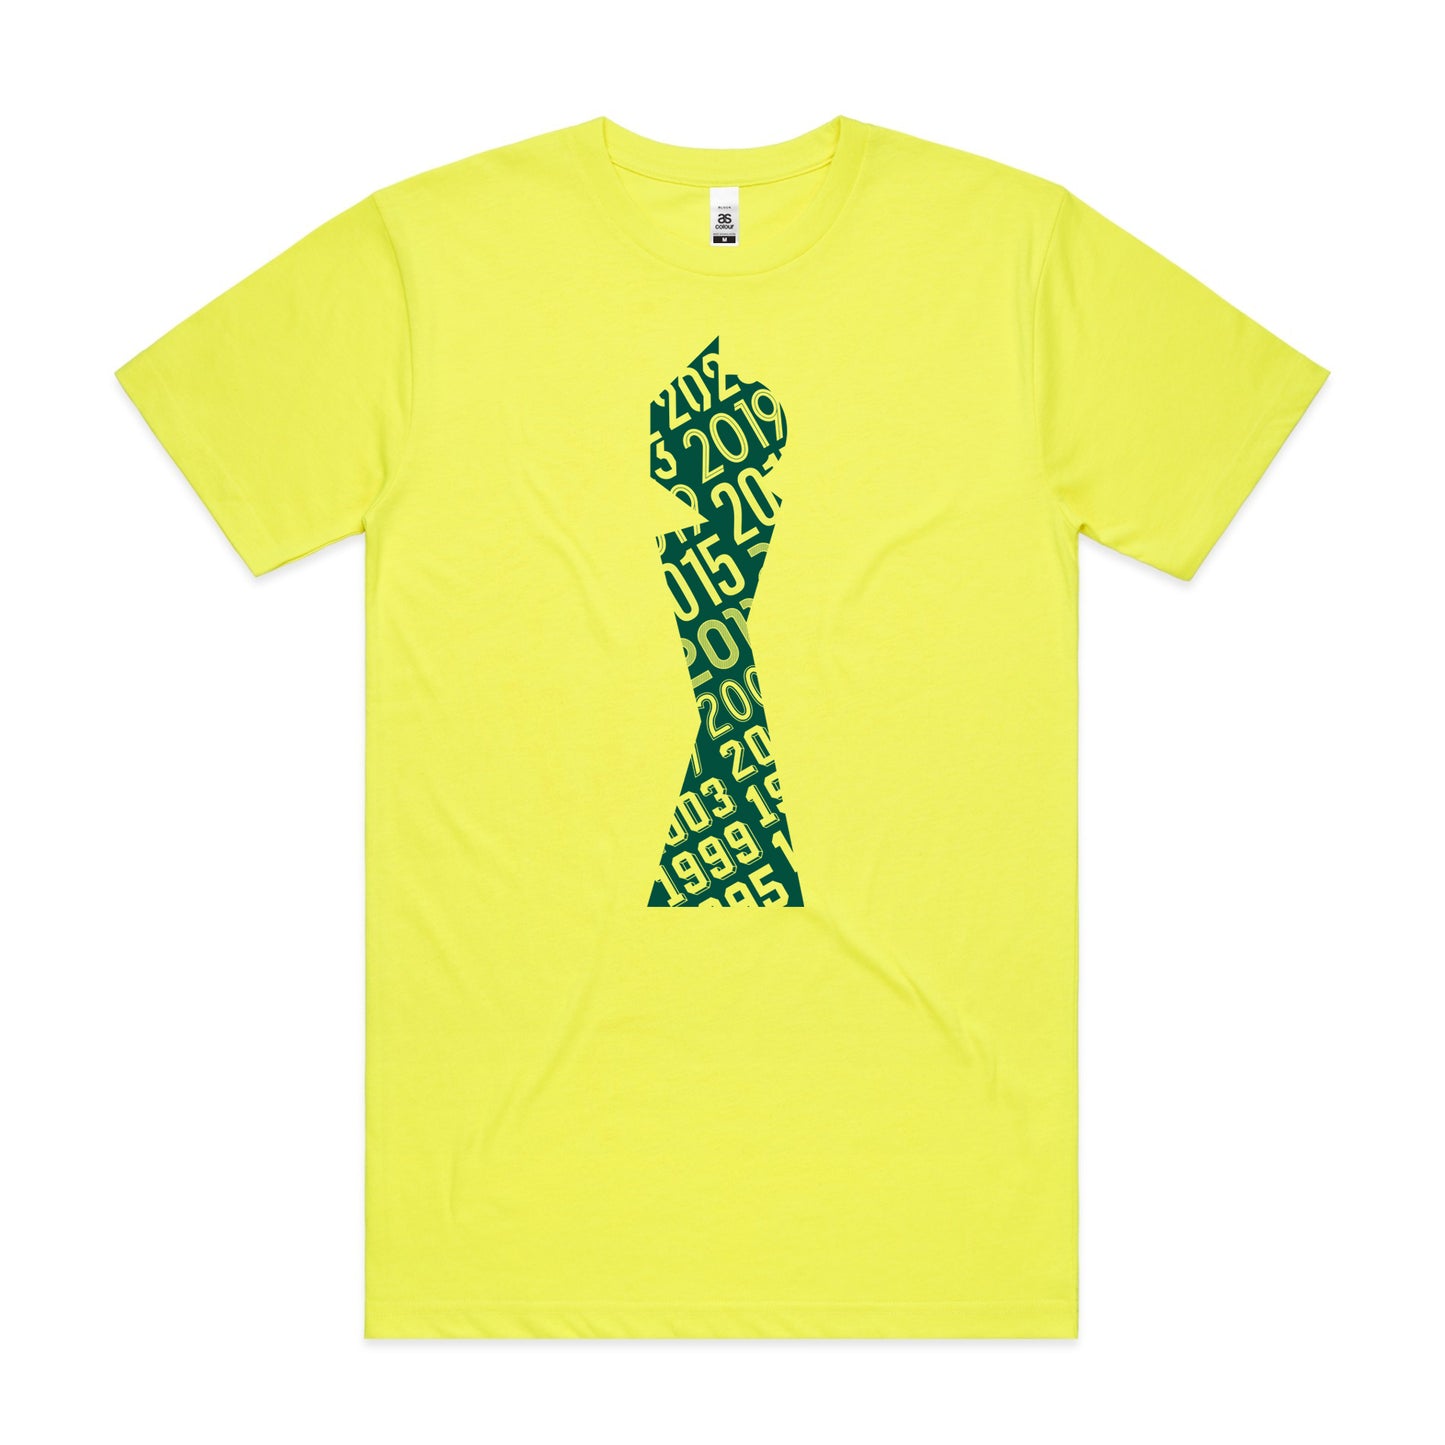 Eight World Cups and Counting T-shirt